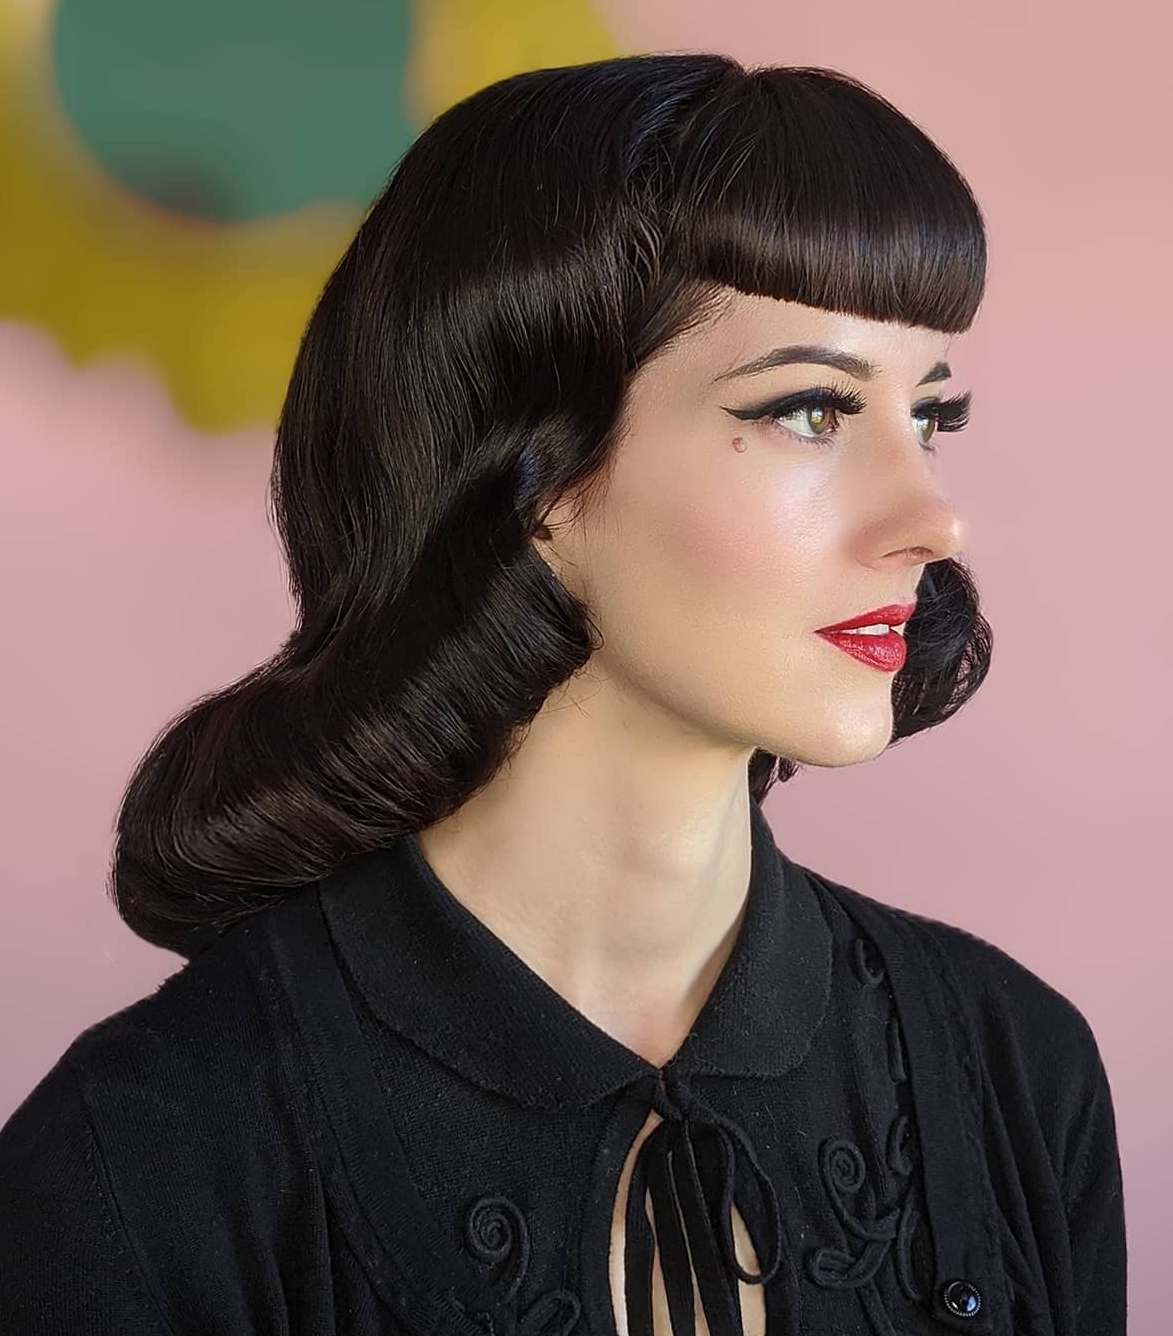 20 Sleek and Stylish Pageboy Haircut Ideas for a Modern Look